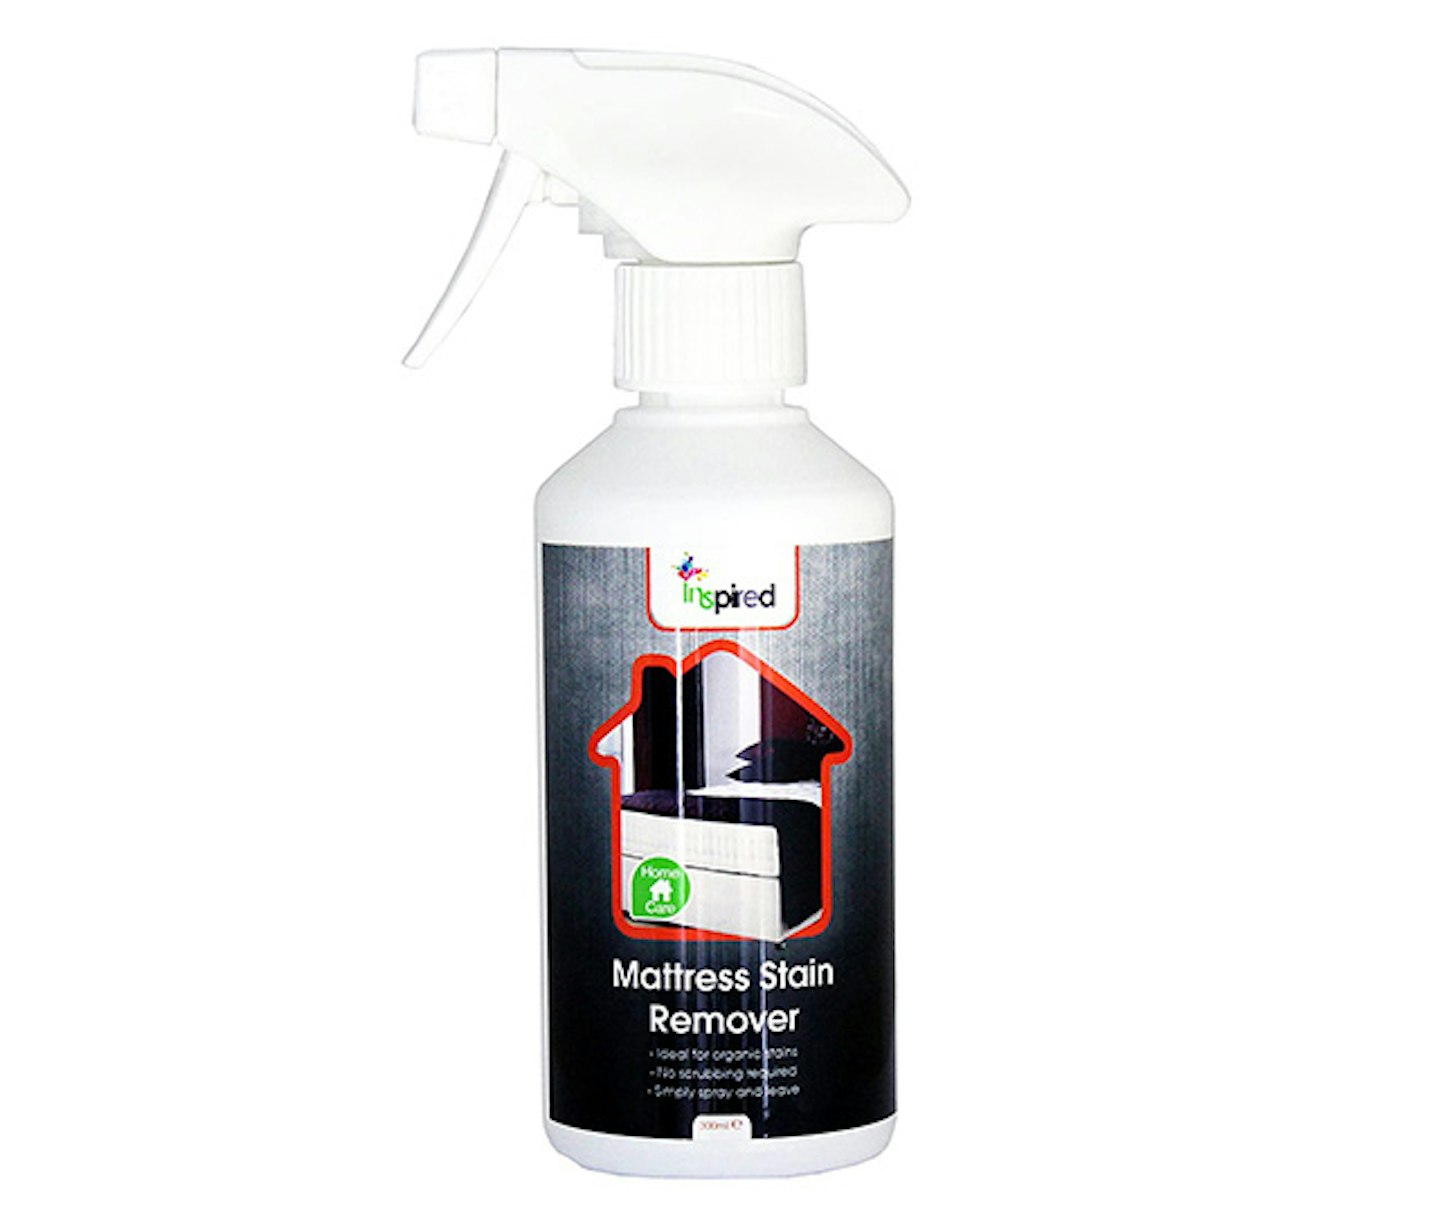 Inspired Professional Mattress Stain Remover